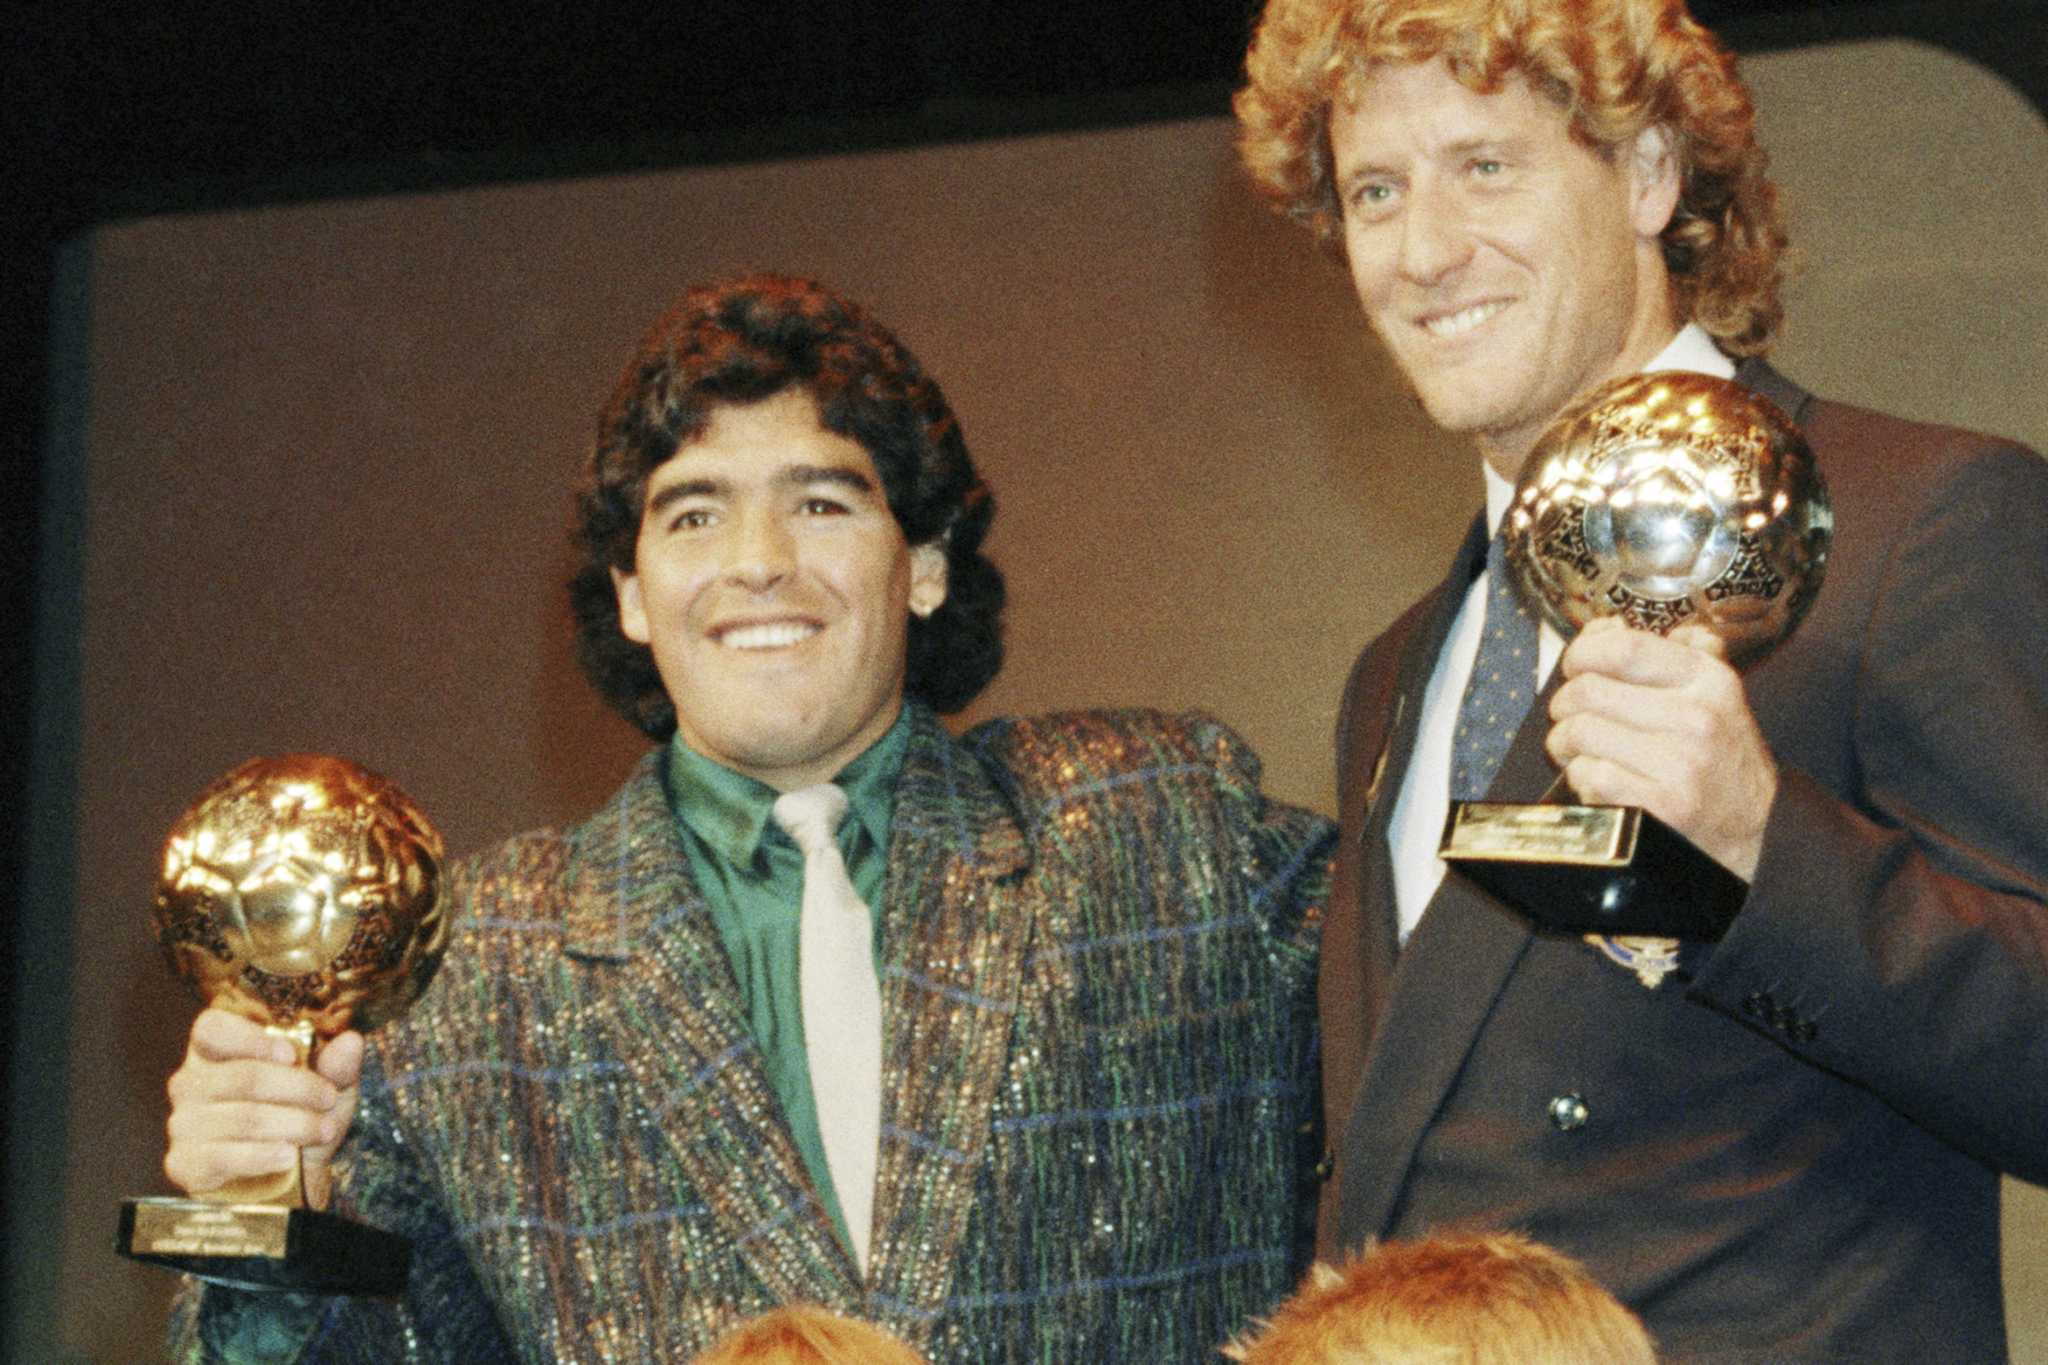 Maradona's heirs lose court battle to block auction of World Cup Golden Ball trophy